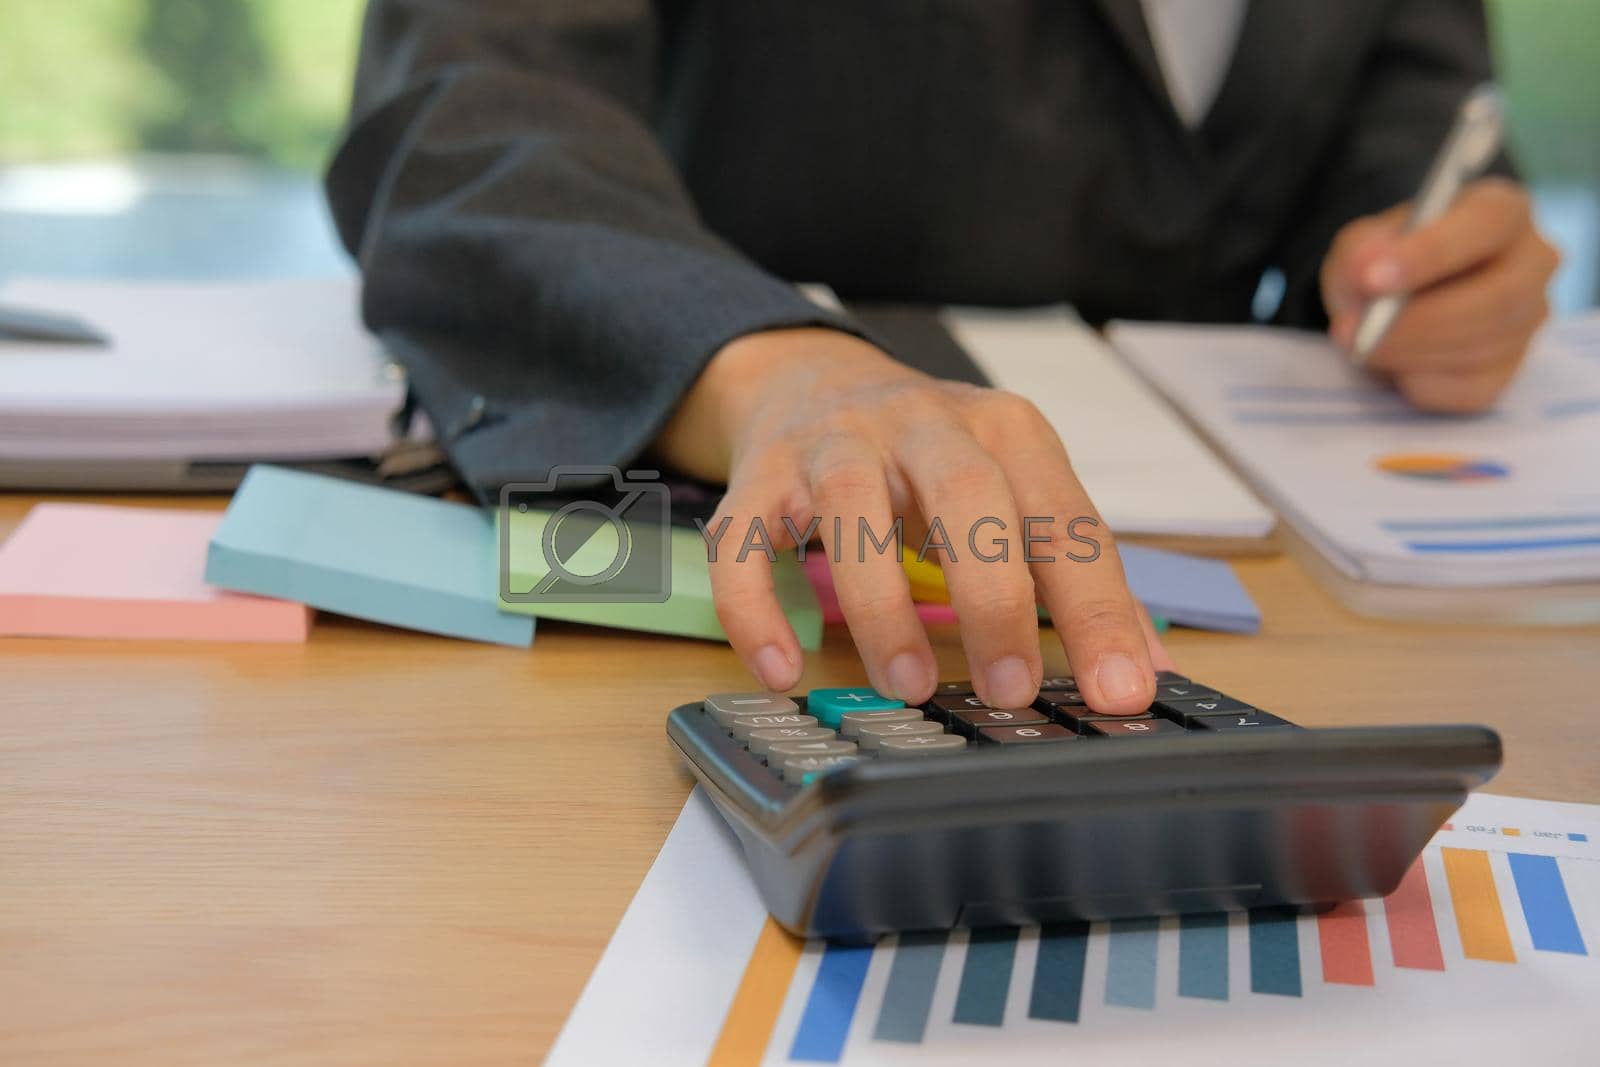 Royalty free image of financial adviser use calculator to calculate revenue & budget. accountant doing accounting. bookkeeper making calculation. by pp99